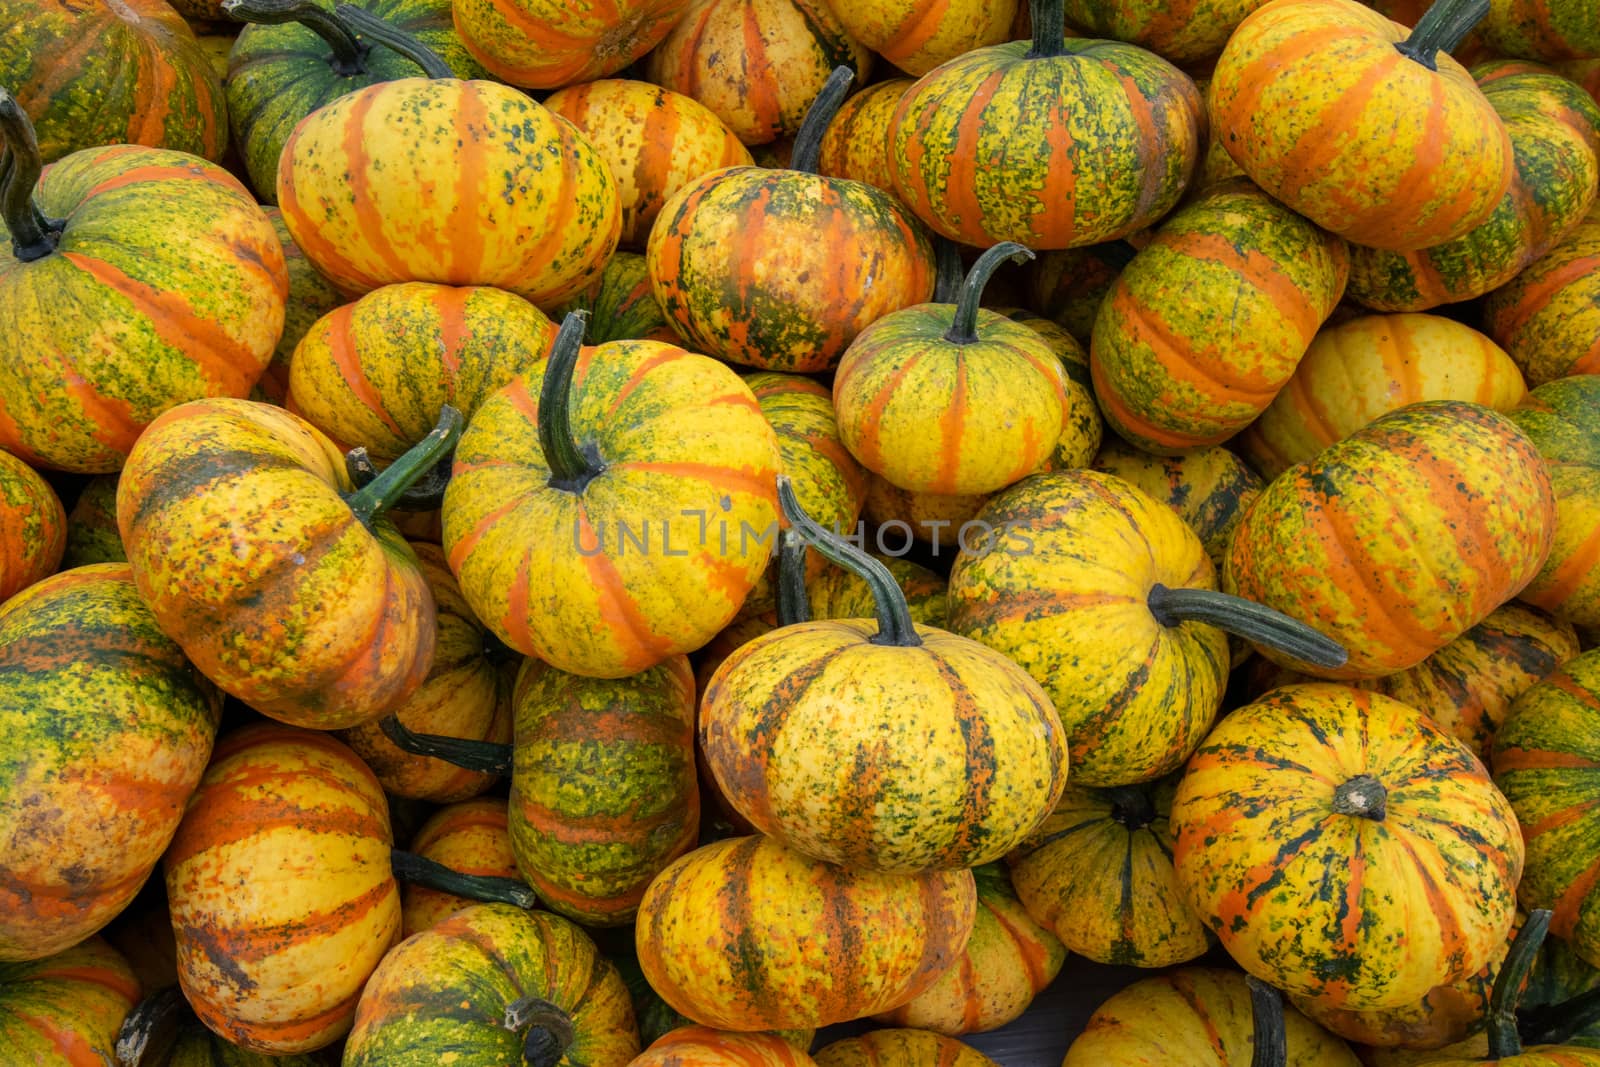 Small Yellow Striped Pumpkins in a Pile Filling the Frame by bju12290